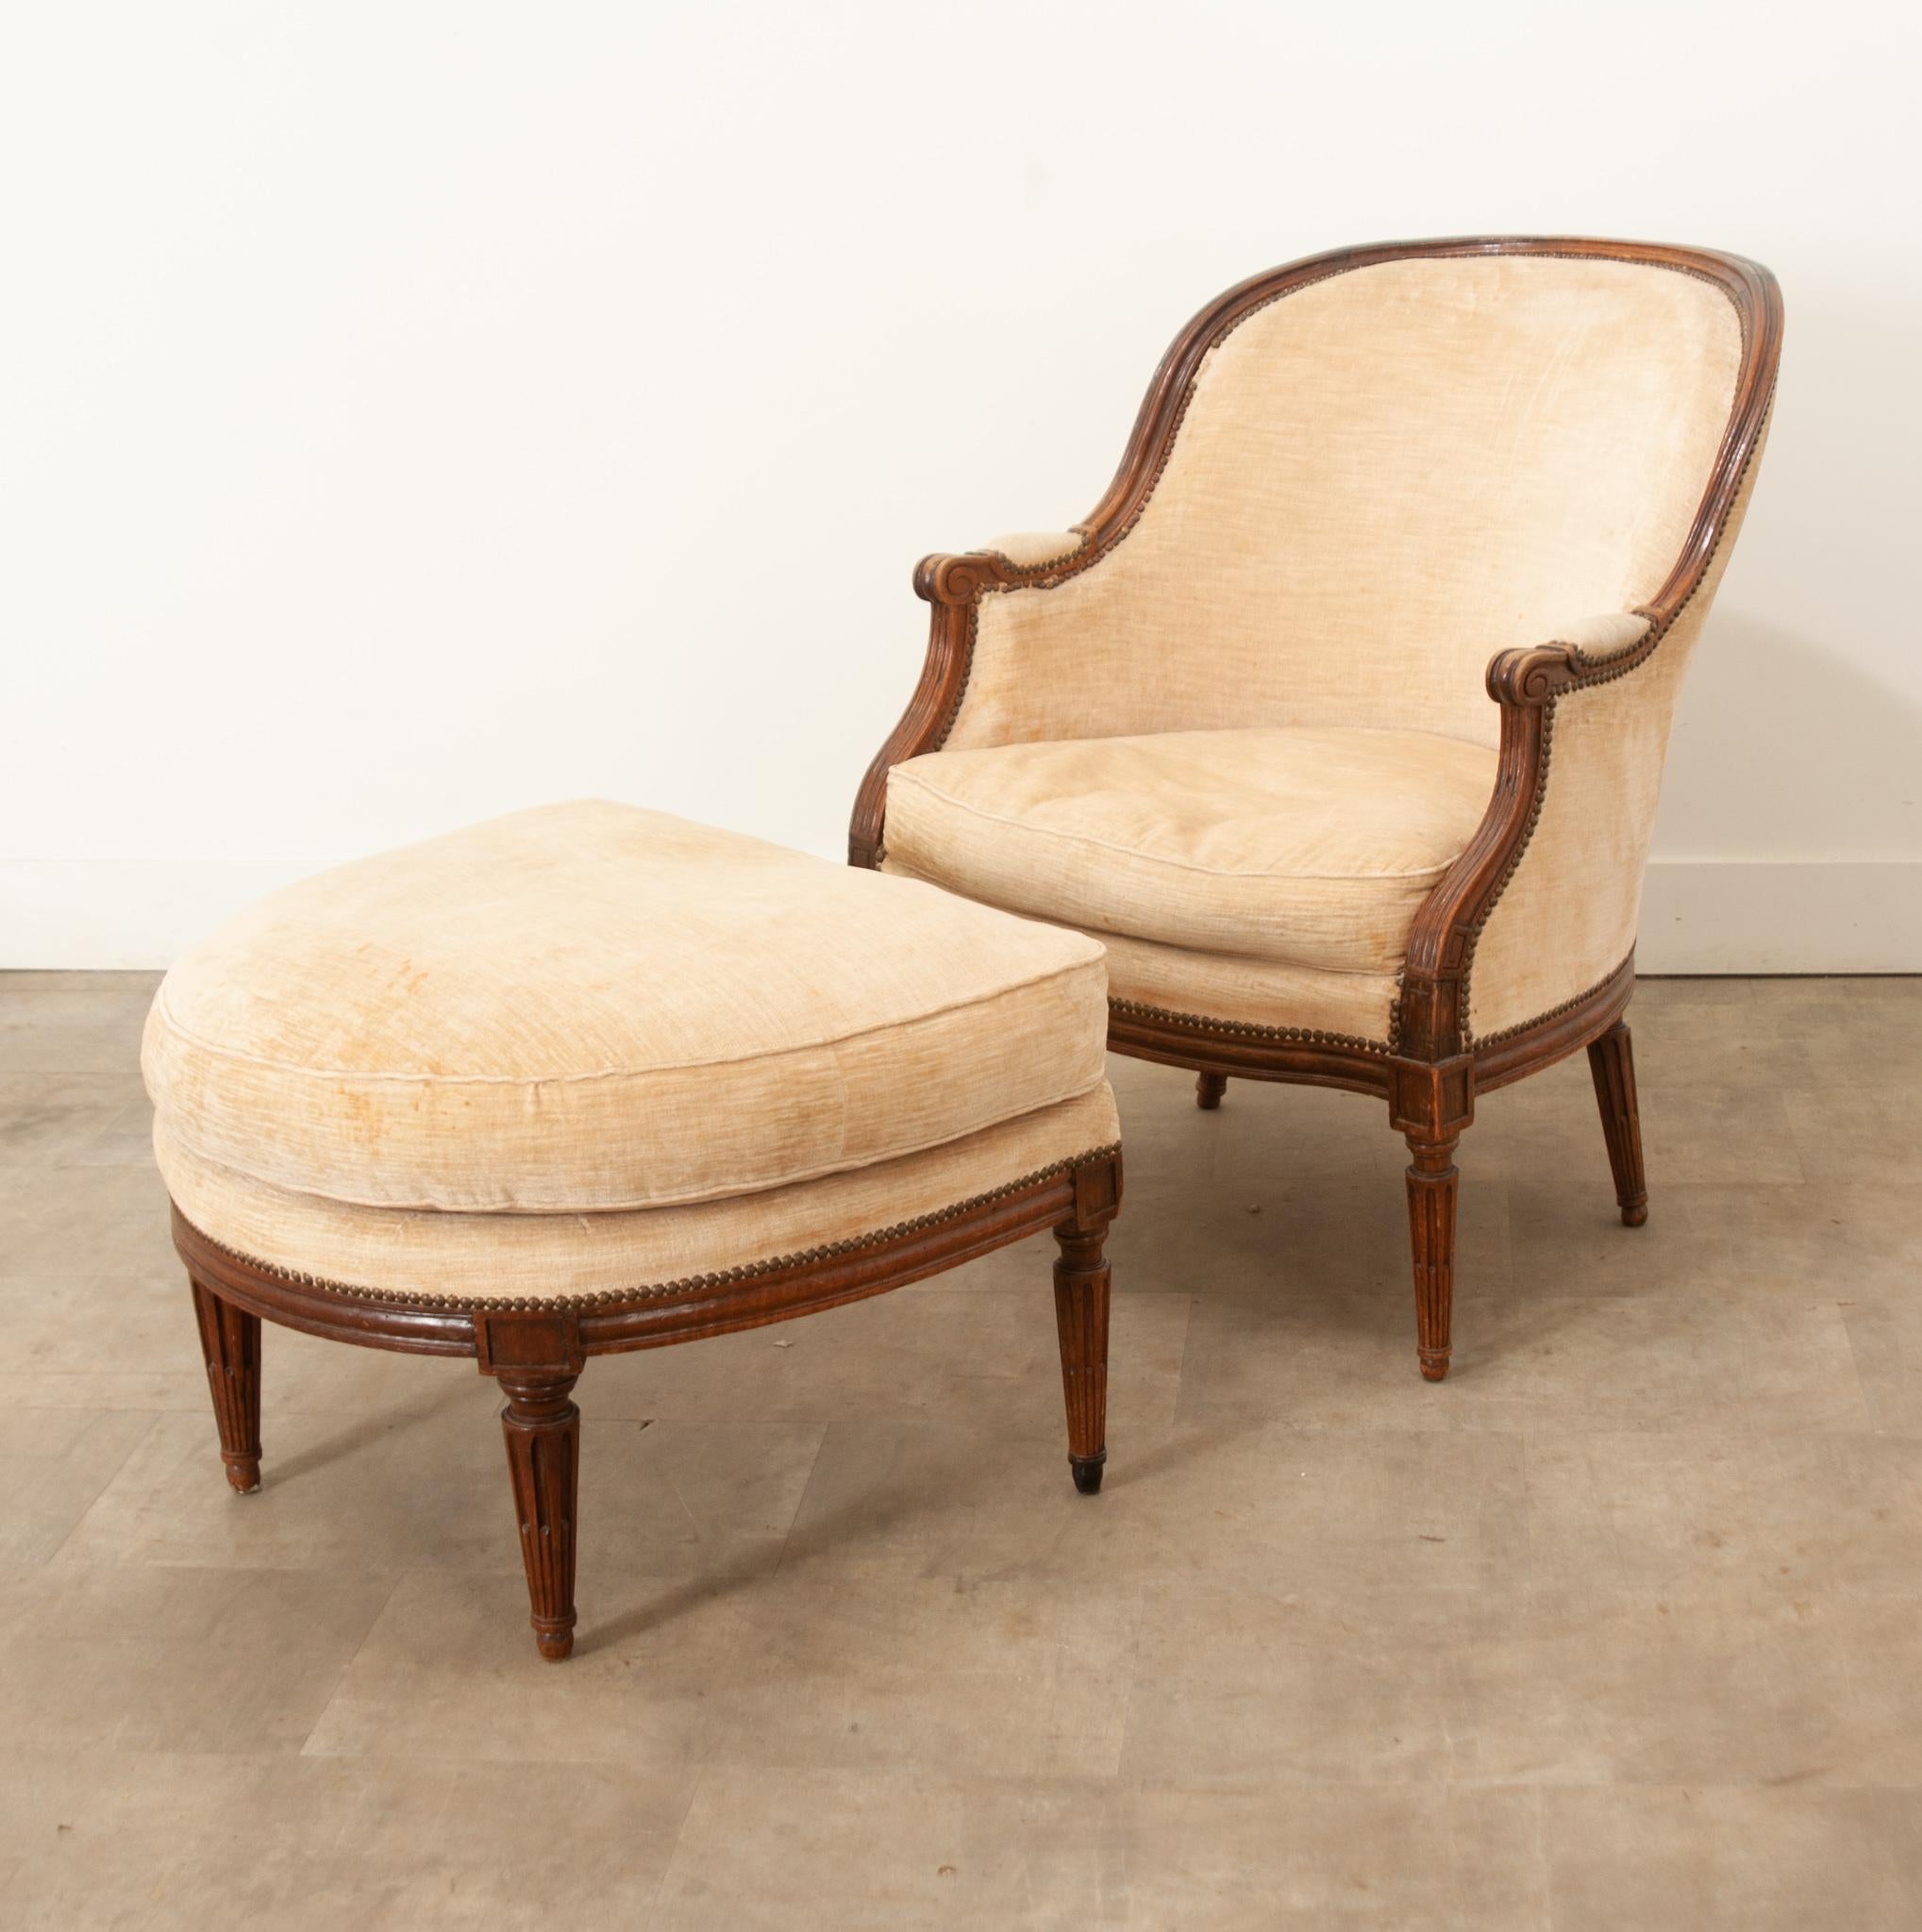 A sophisticated set that includes a French 19th century oak bergere and ottoman. Fluted legs, indicative of the Louis XVI style, support each broad cushioned piece with slender elegance. The sturdy oak frames of each are deeply carved, molded and